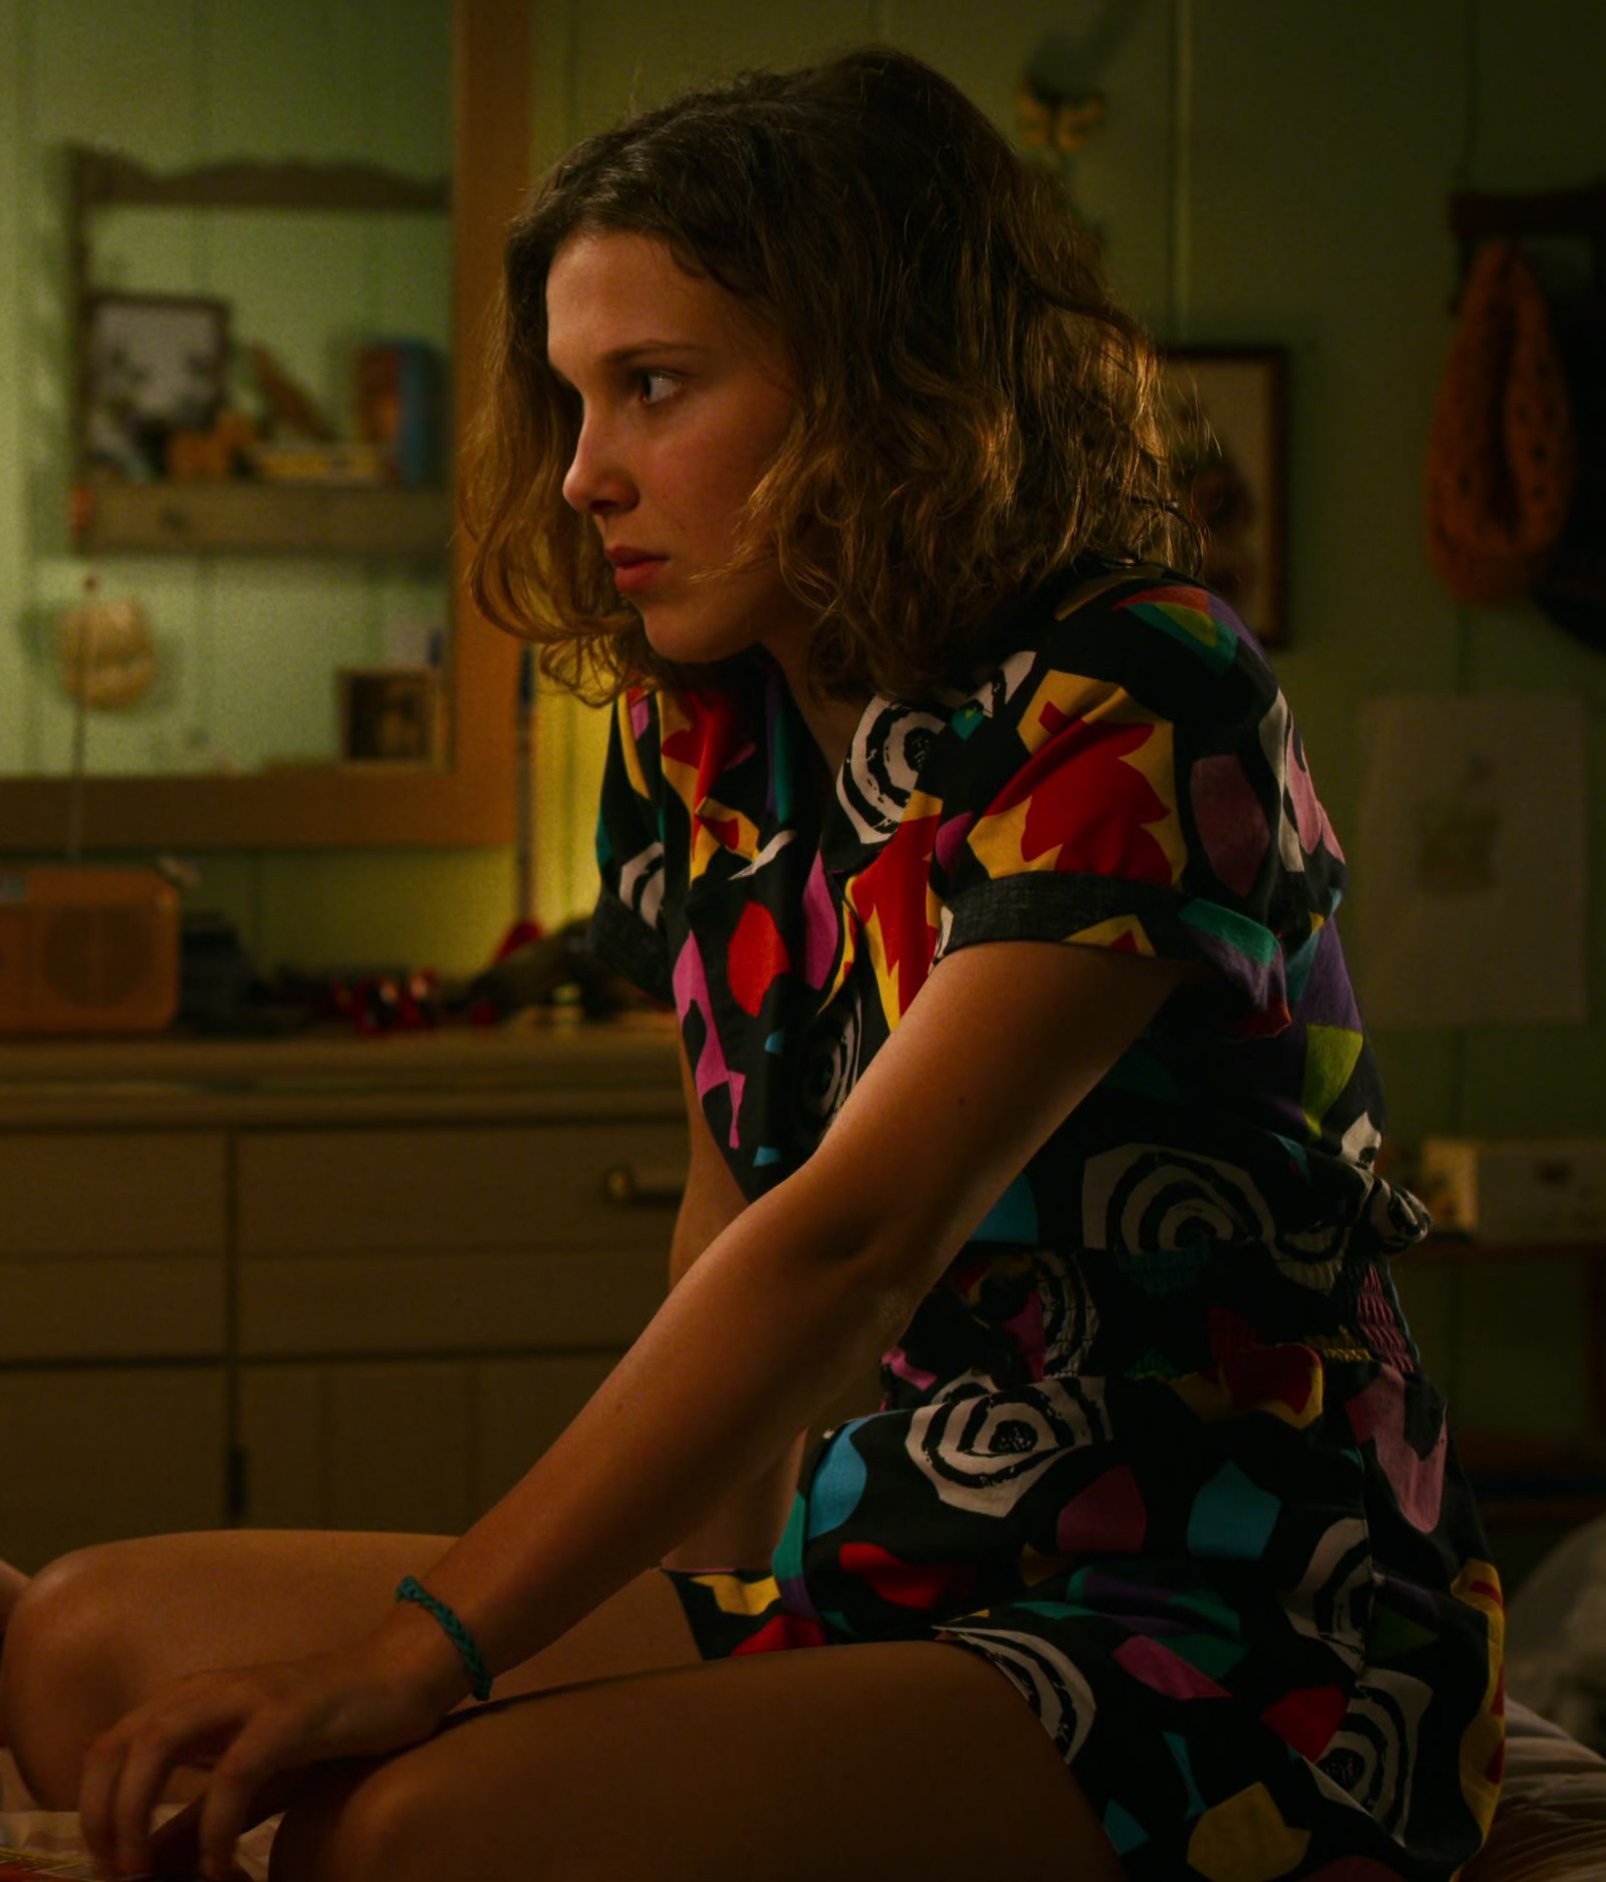 Worn on Stranger Things TV Show - Graphic Pattern Romper Worn by Millie Bobby Brown as Eleven / Jane Hopper ("El")